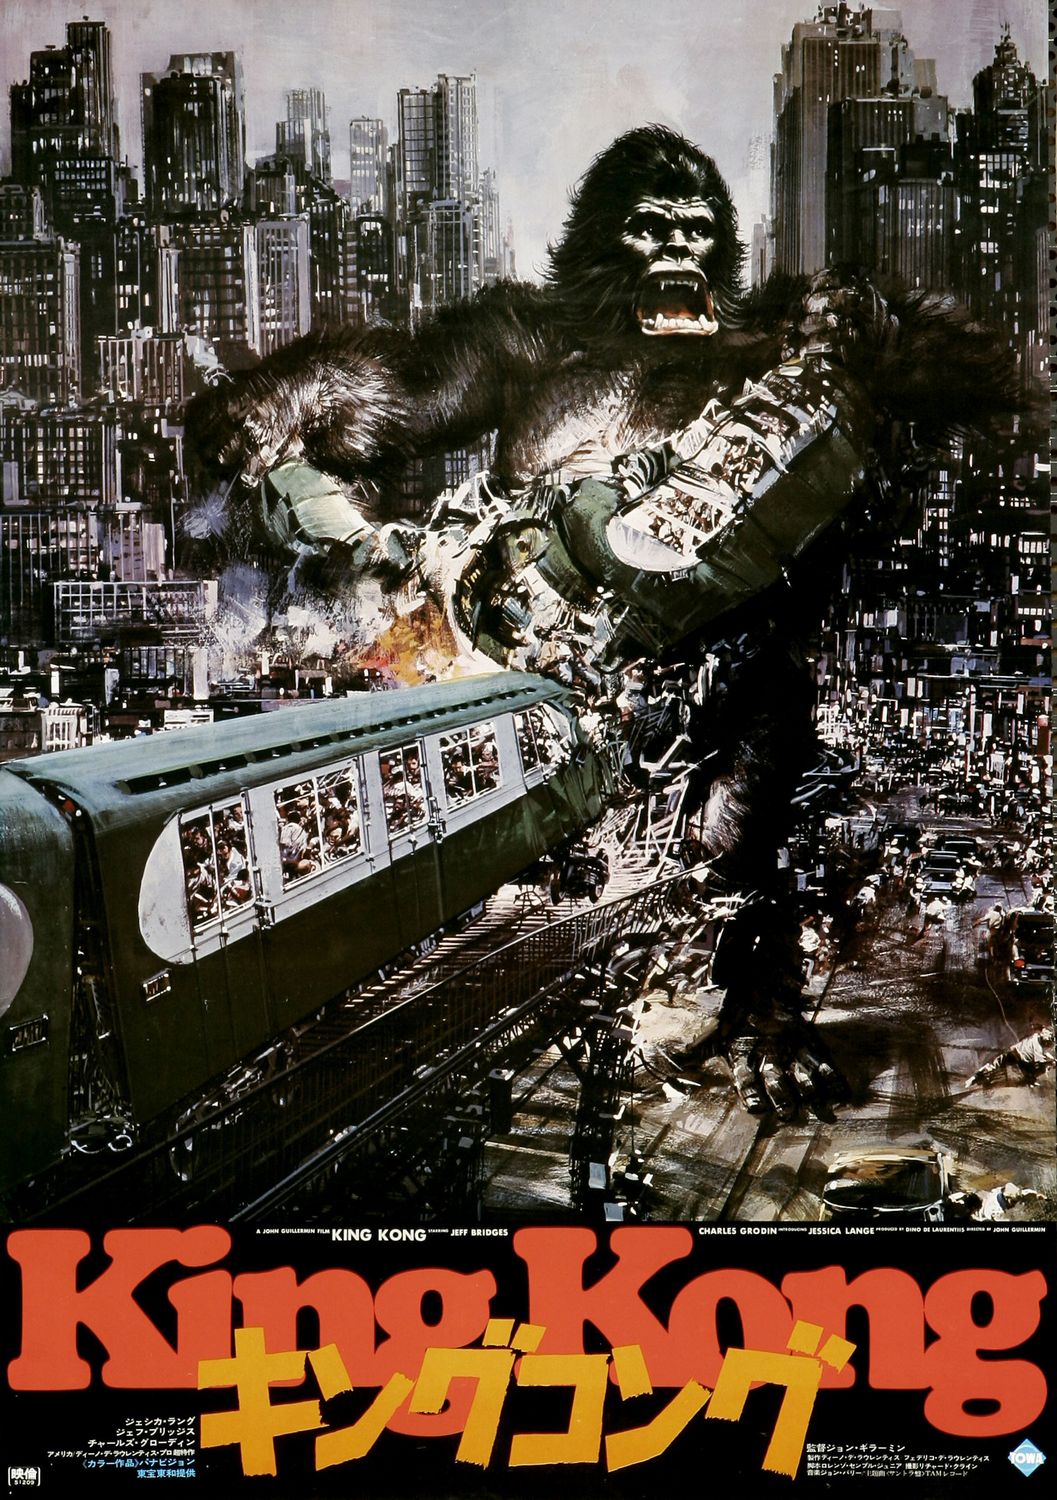 Extra Large Movie Poster Image for King Kong (#2 of 2)